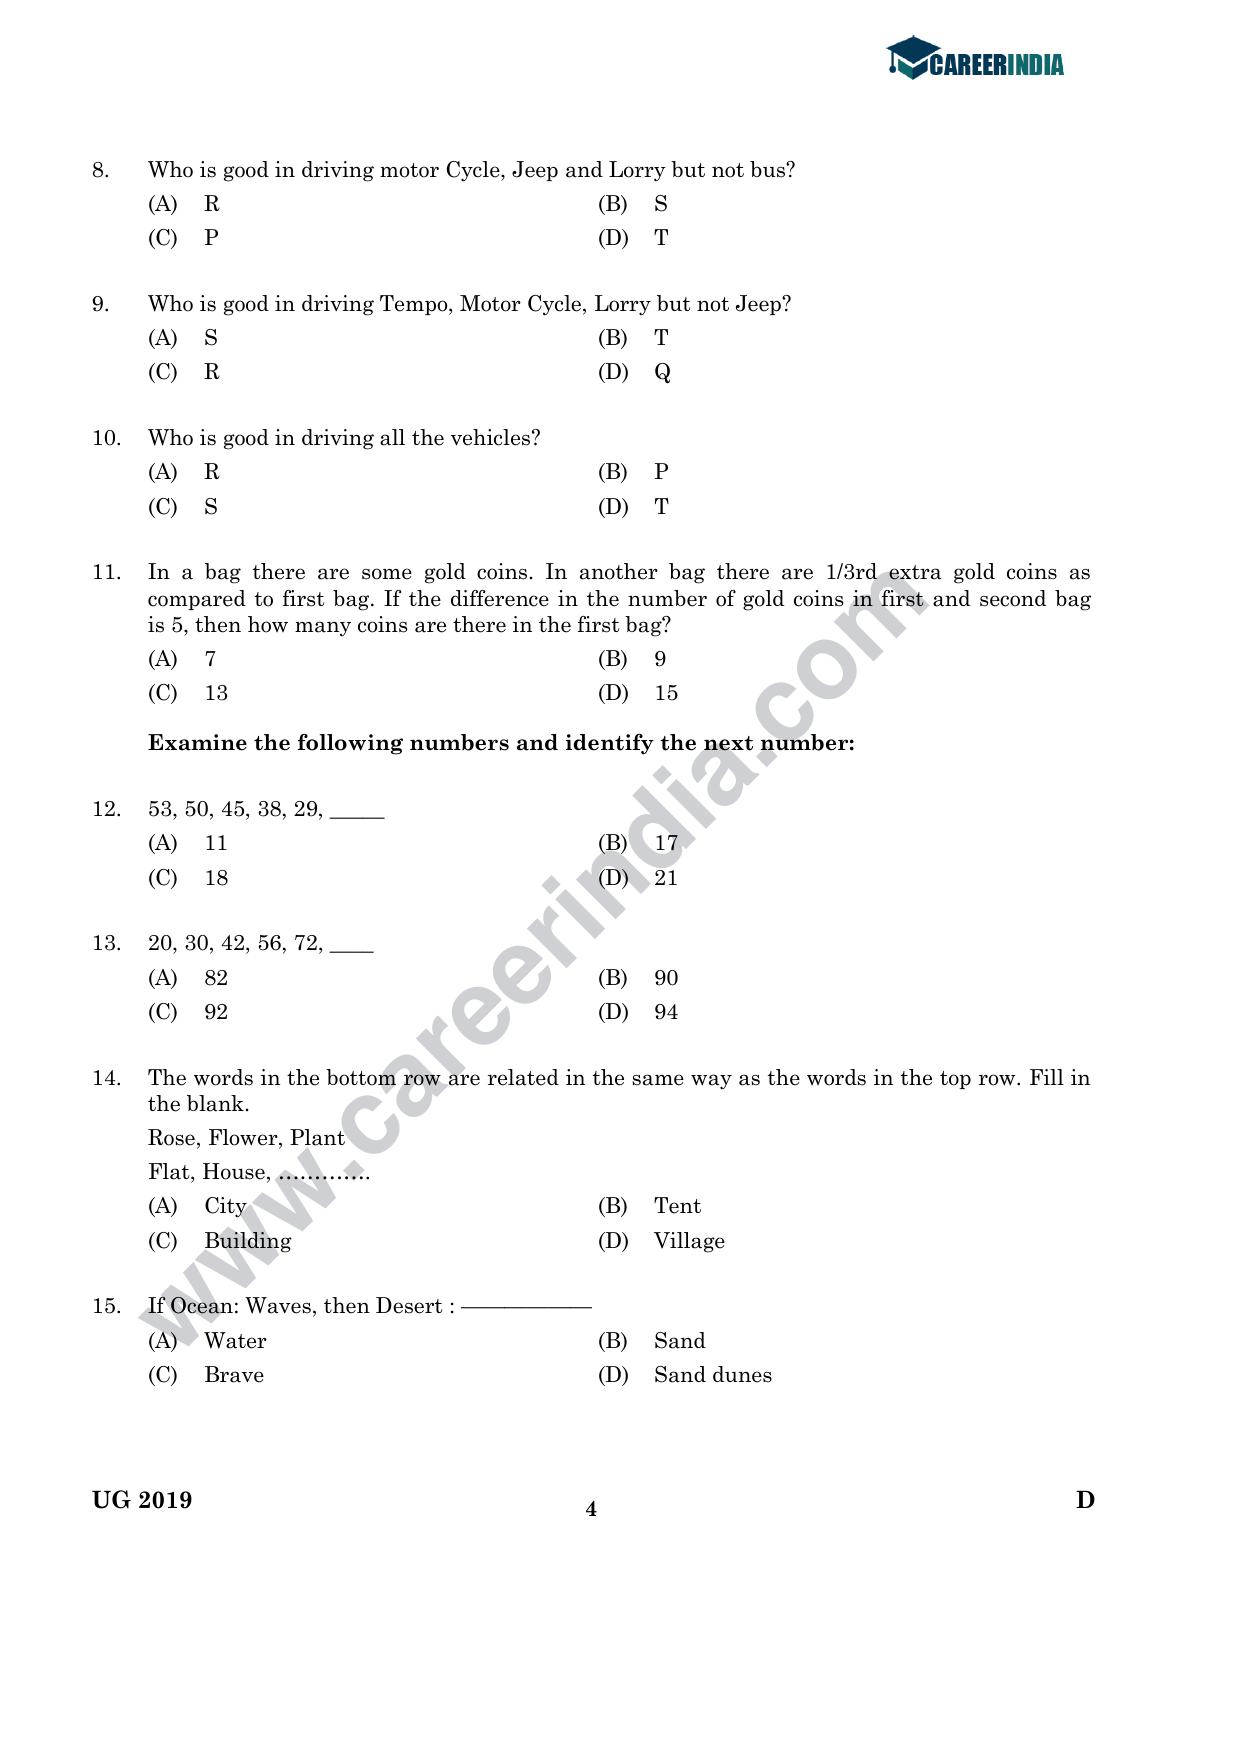 CLAT 2019 UG Logical-Reasoning Question Paper - Page 3